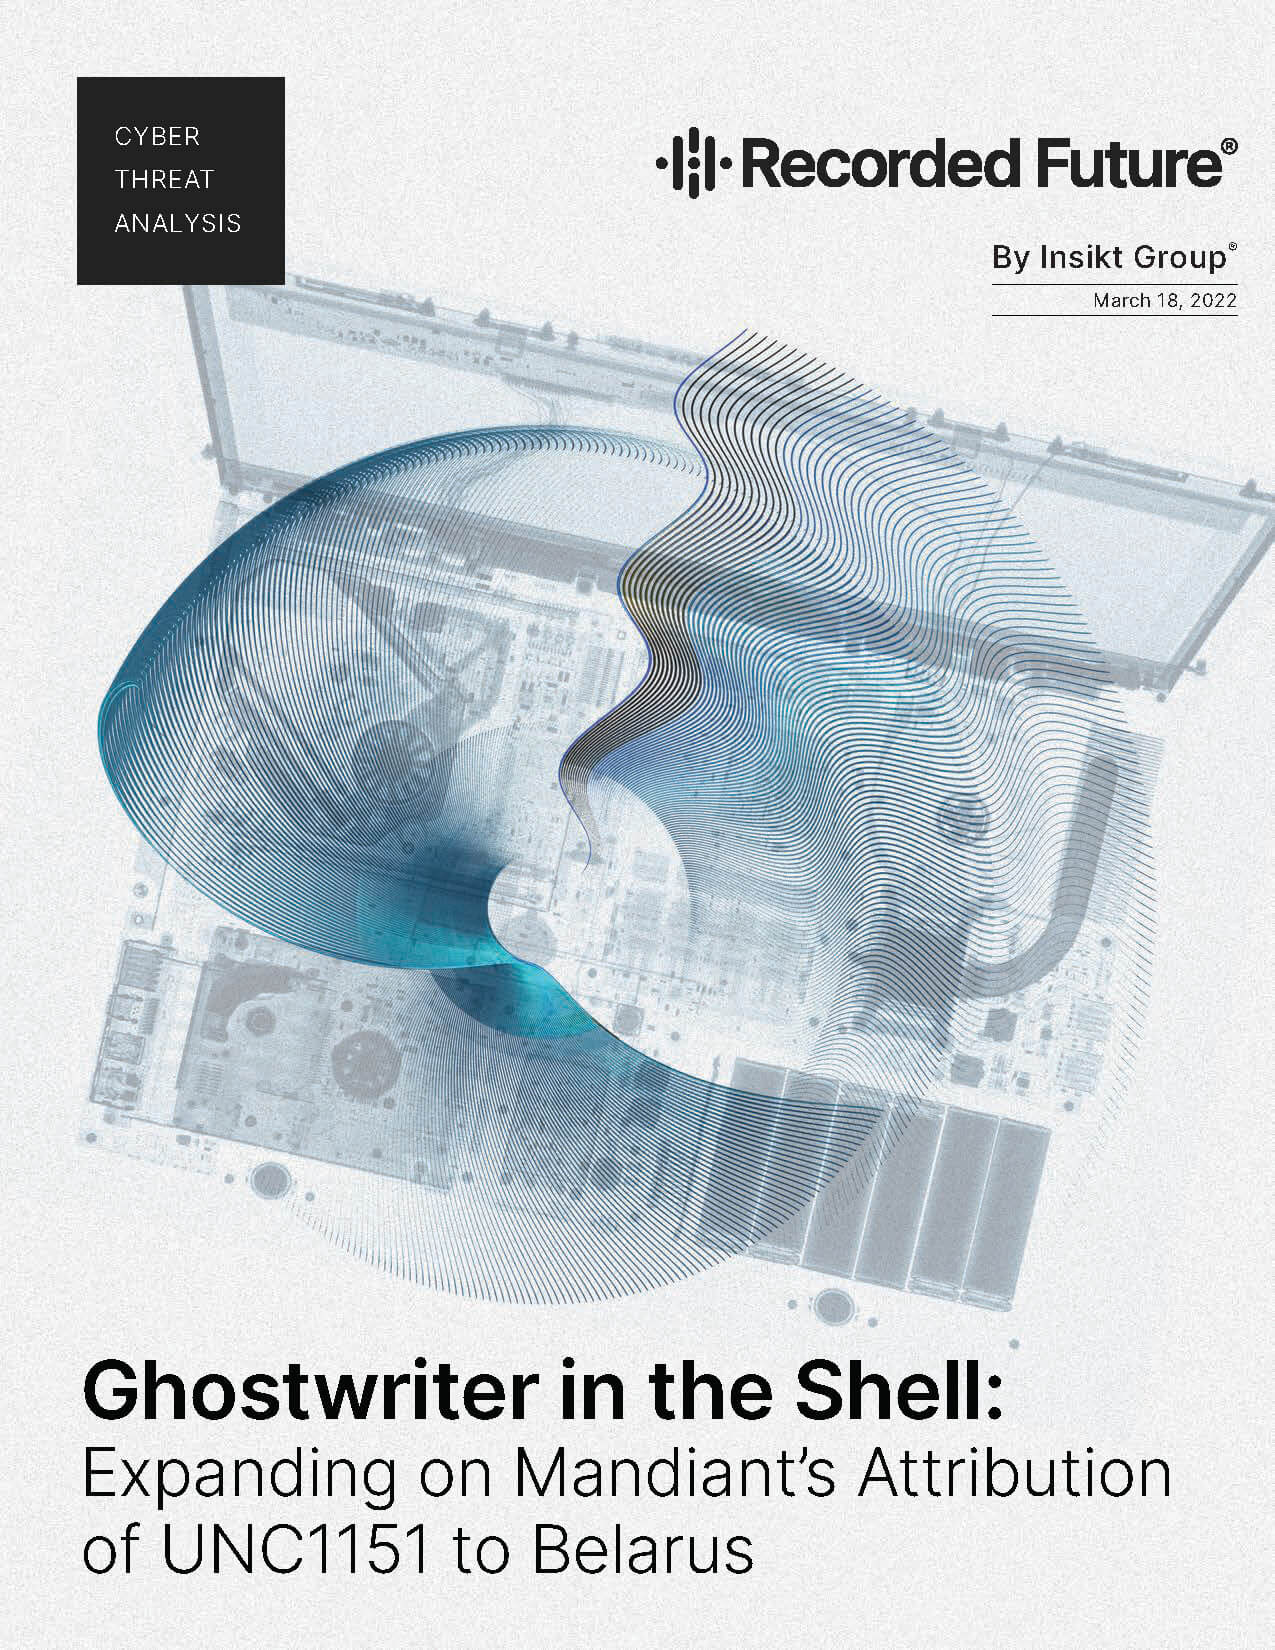 Ghostwriter in the Shell: Expanding on Mandiant’s Attribution of UNC1151 to Belarus